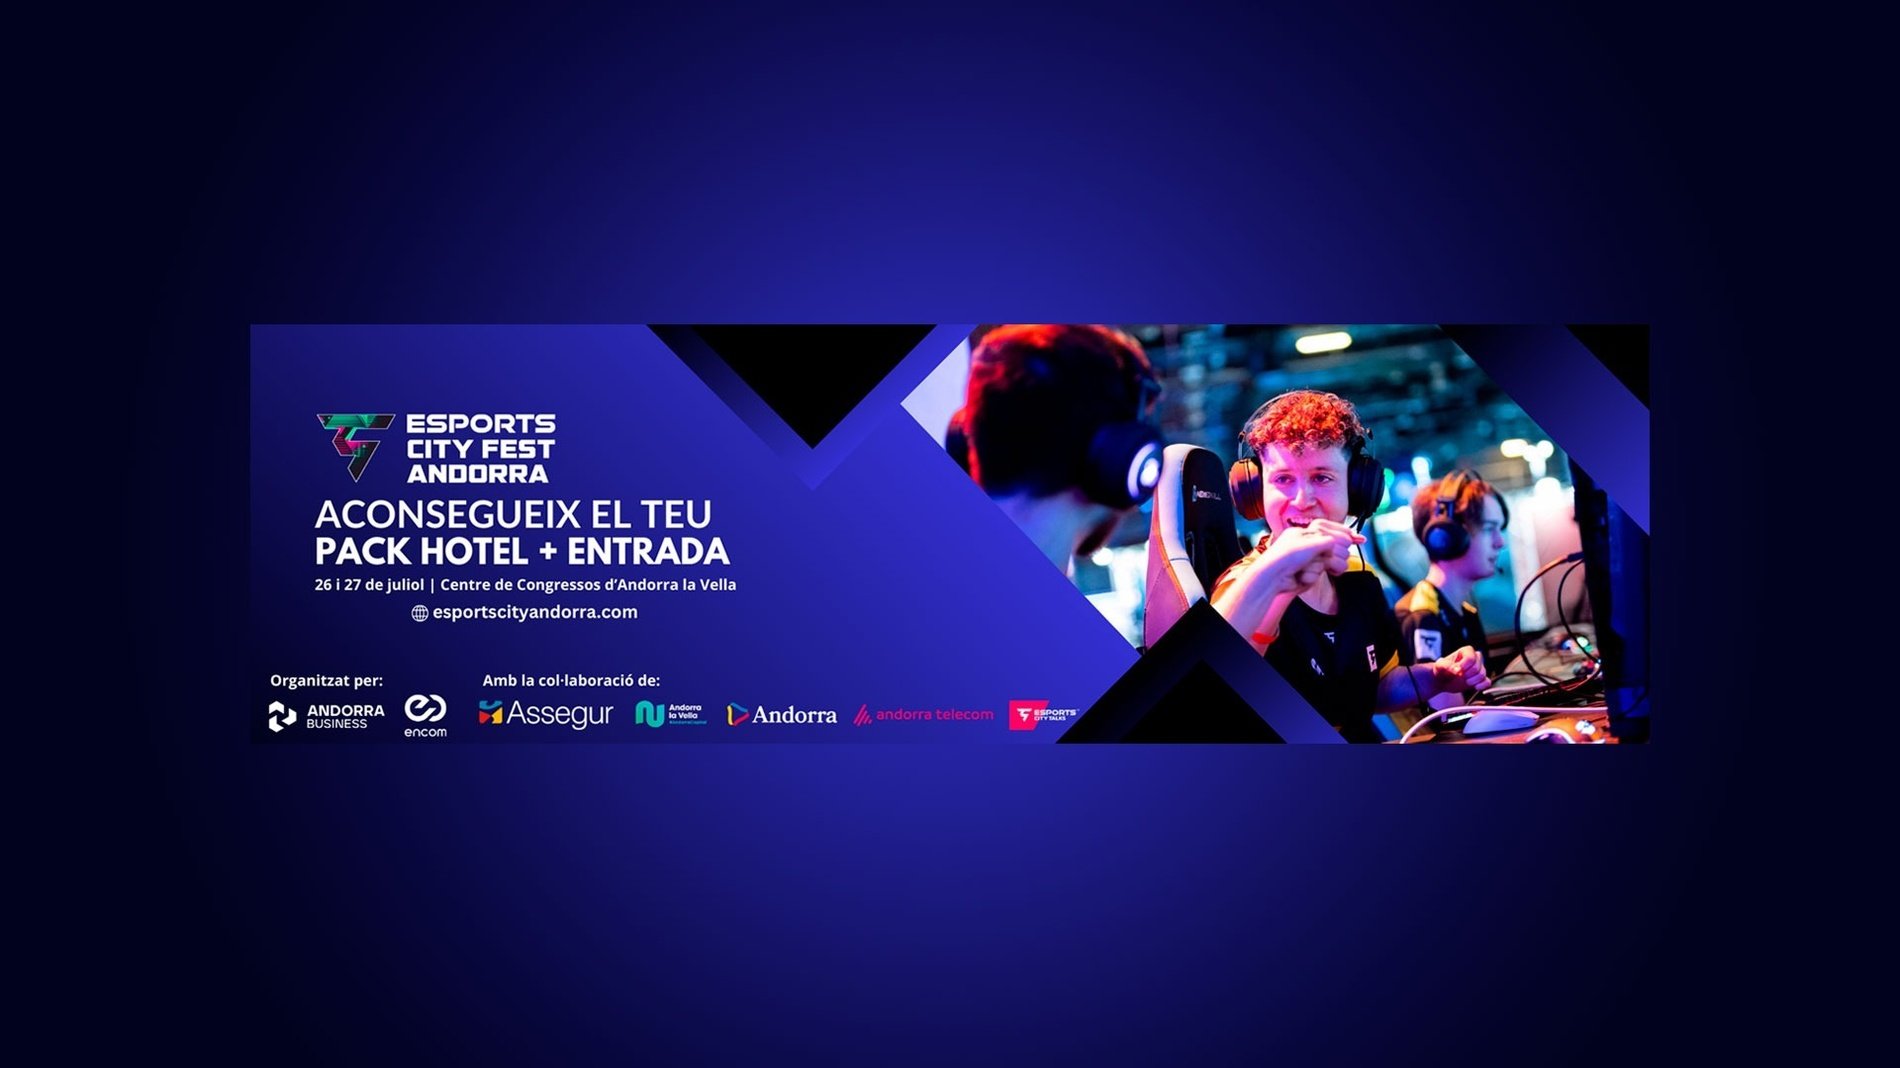 an advertisement for the esports city fest andorra